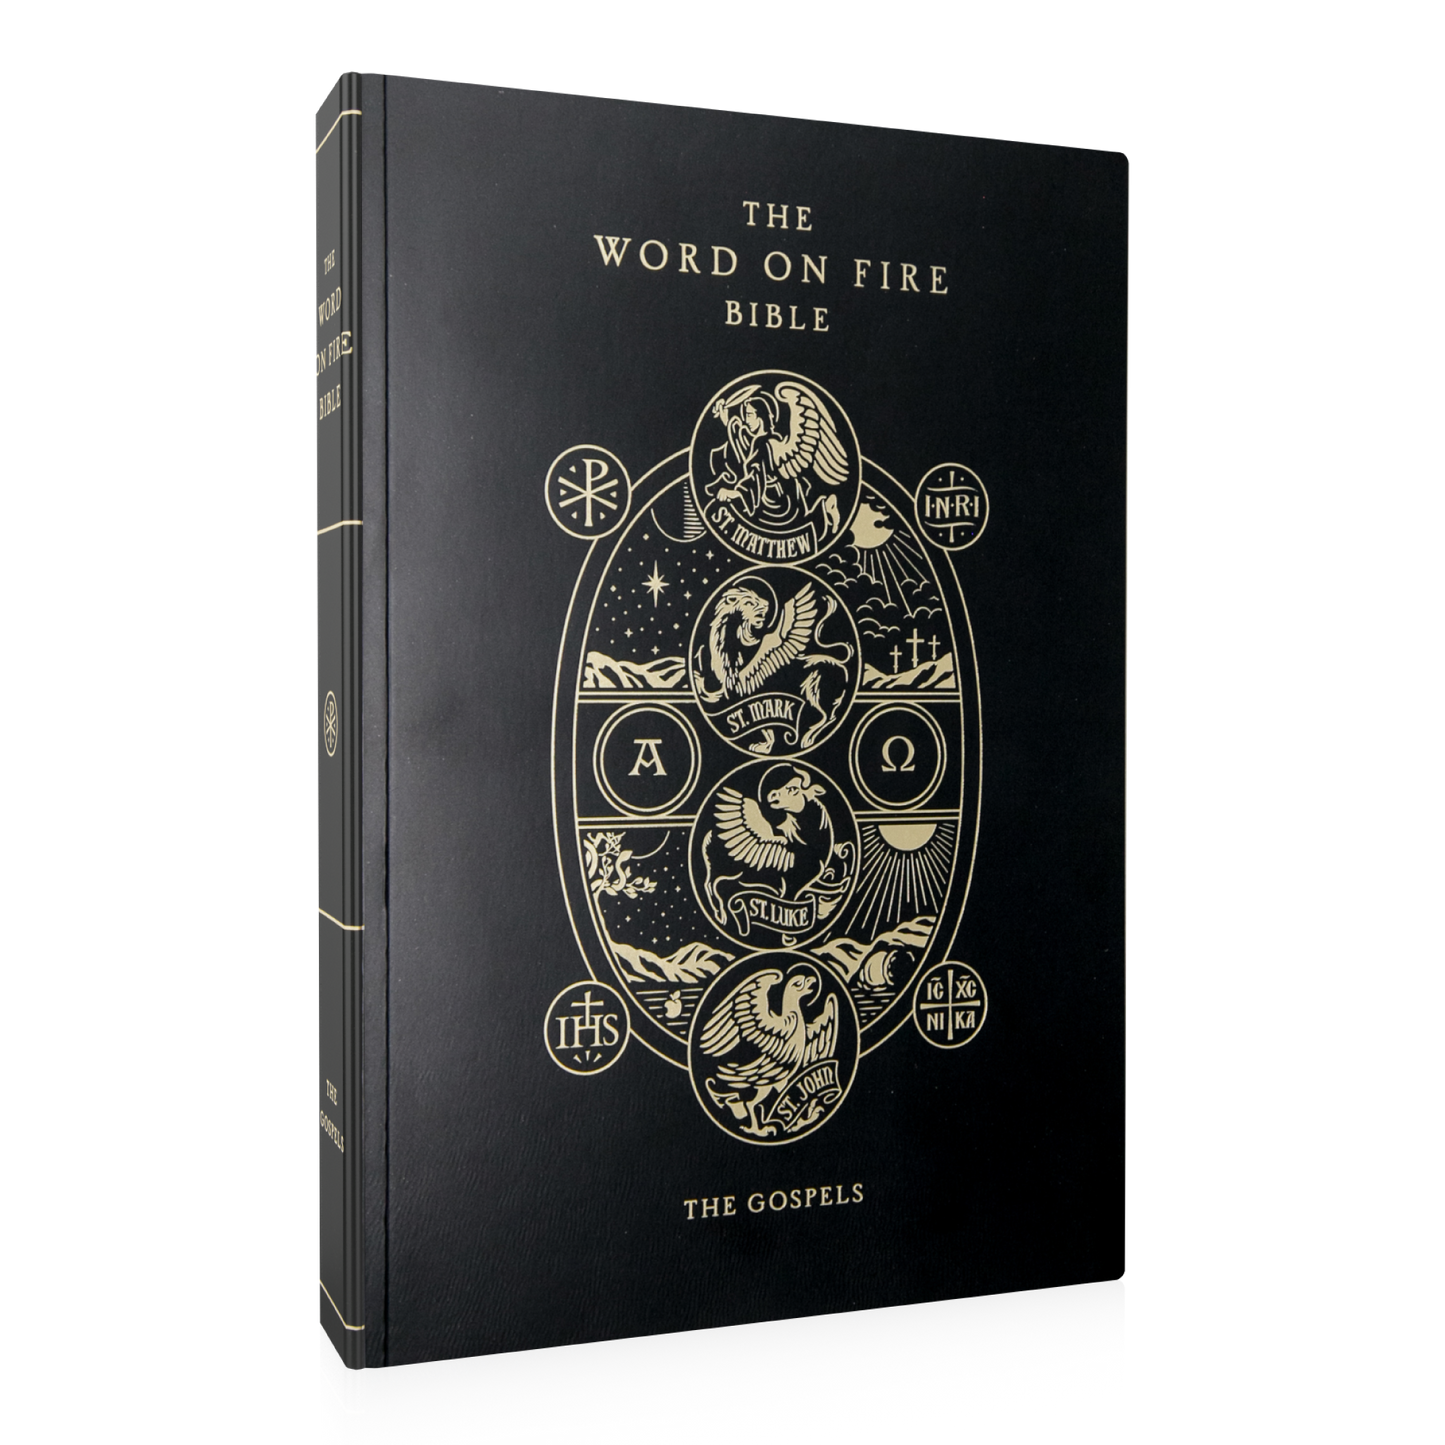 The Word on Fire Bible (Volume I): The Gospels